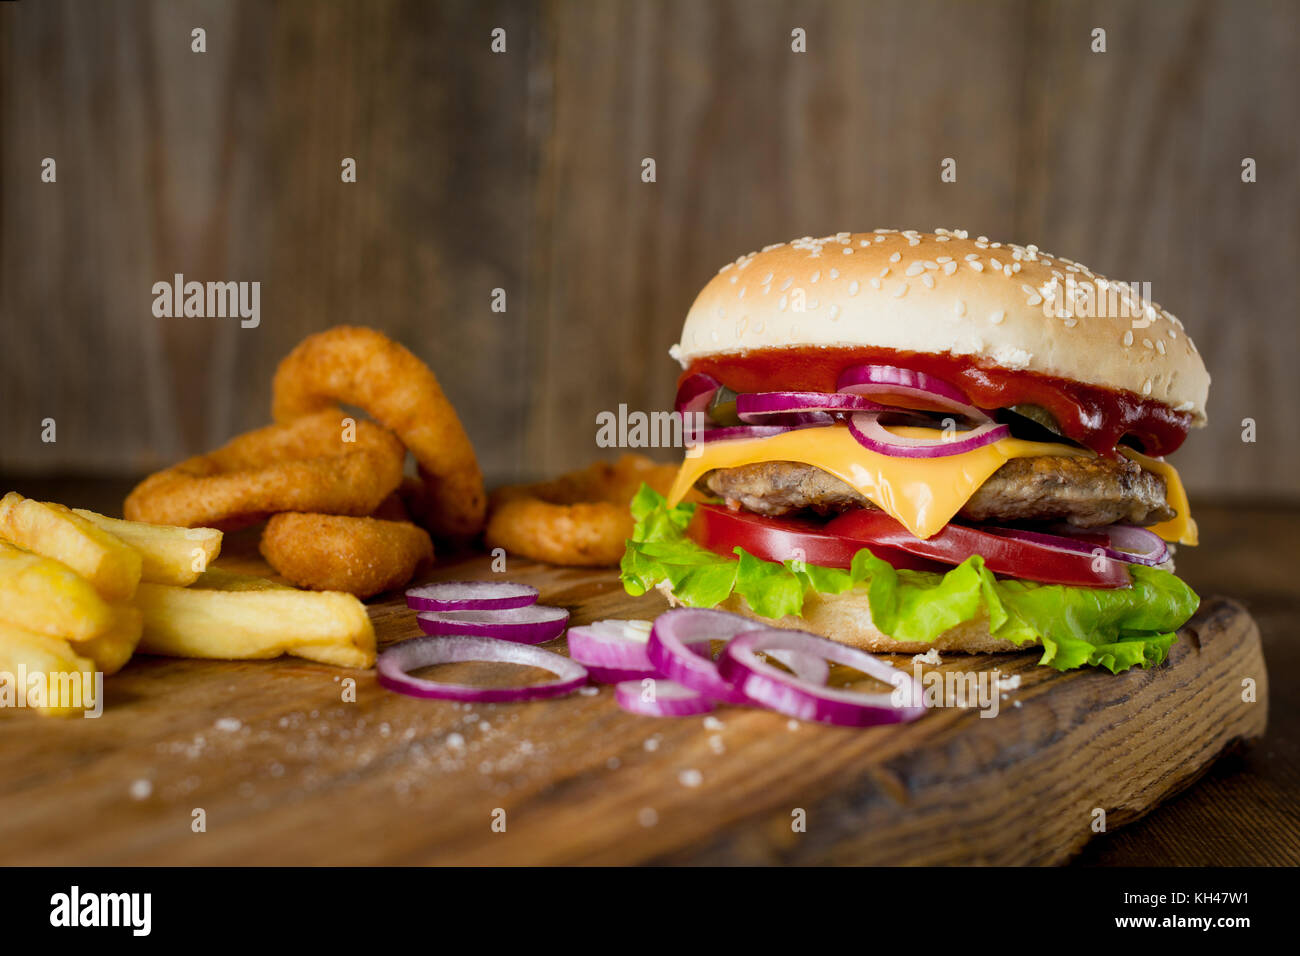 Cheeseburger, french fries and onion rings on wooden chopping board over wooden backdrop. Horizontal, closeup view Stock Photo